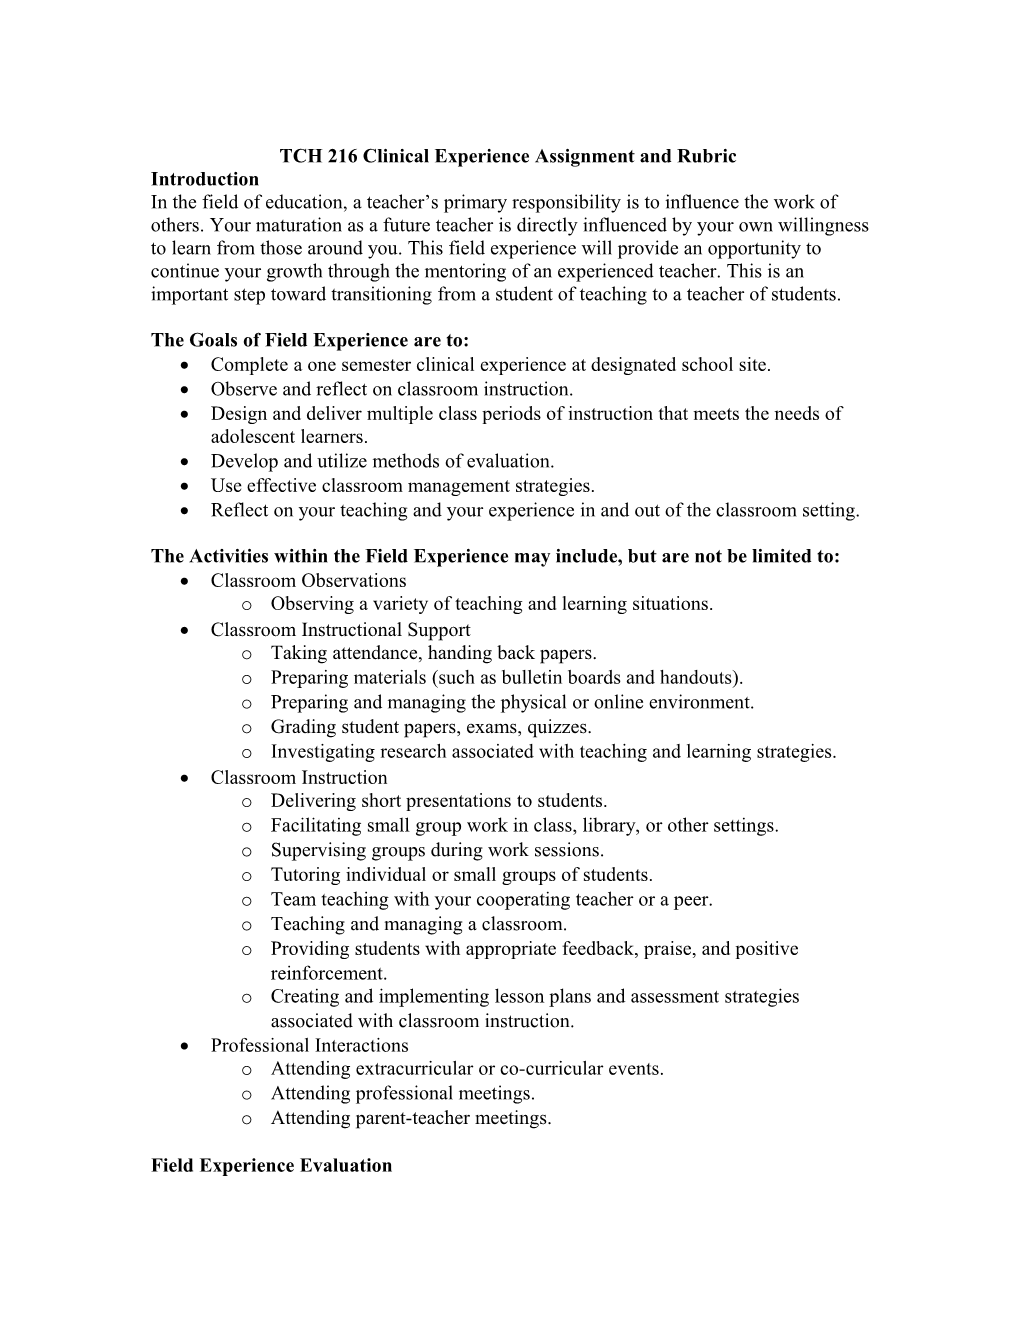 TCH 216 Clinical Experience Assignment and Rubric